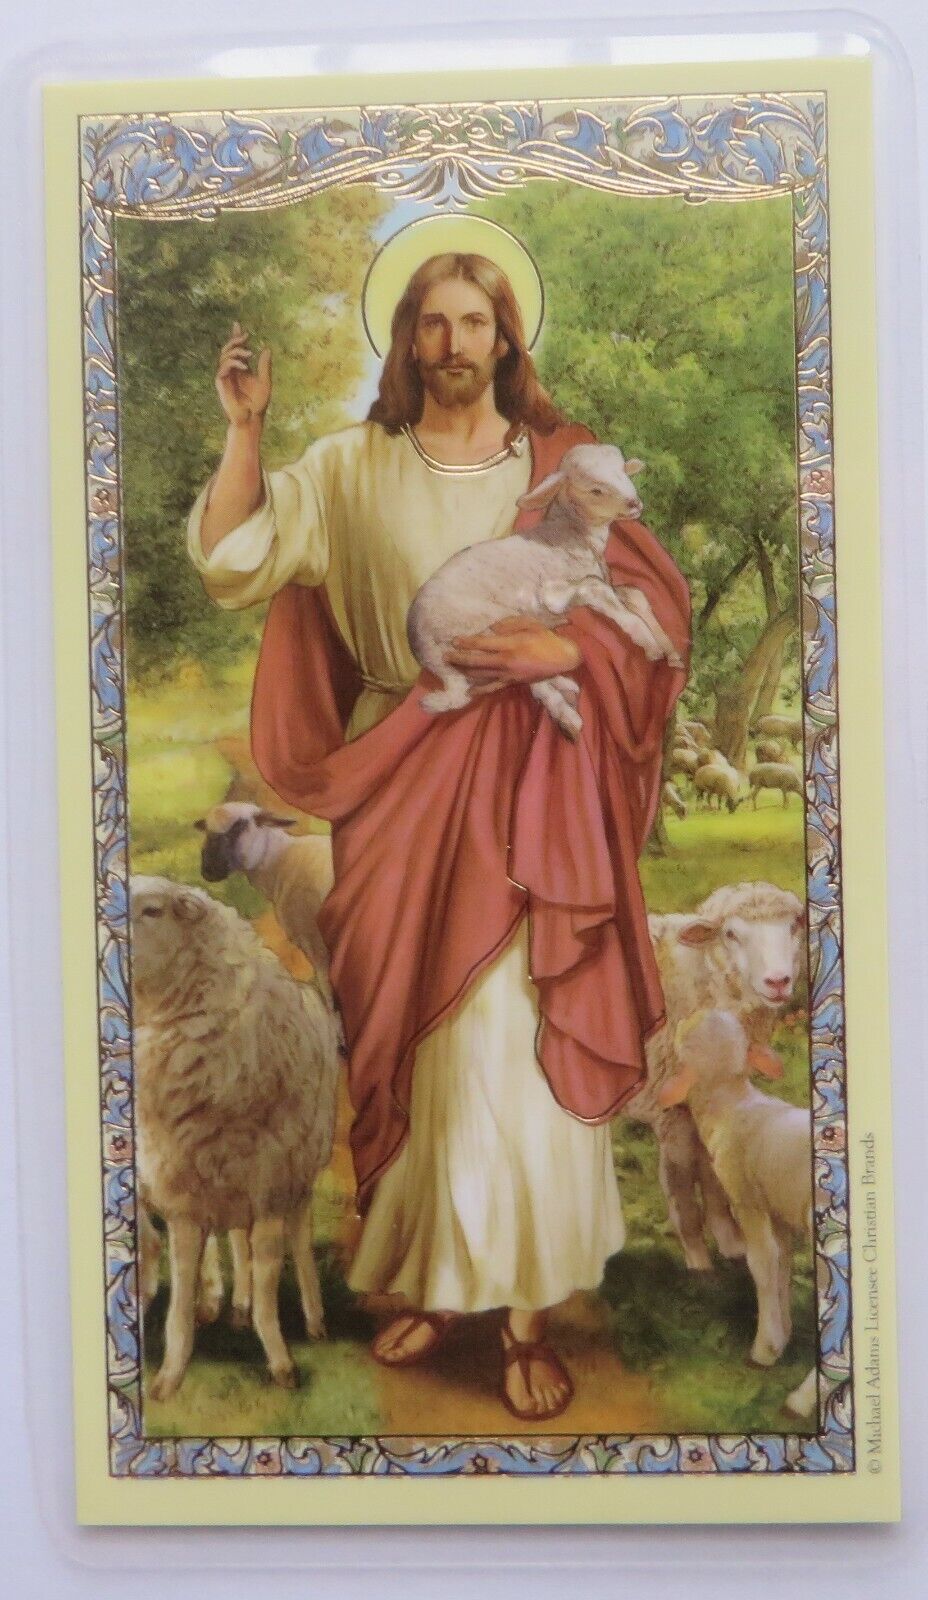  Psalm 23 - 23rd Psalm - Christ the Good Shepherd - Laminated Holy Card